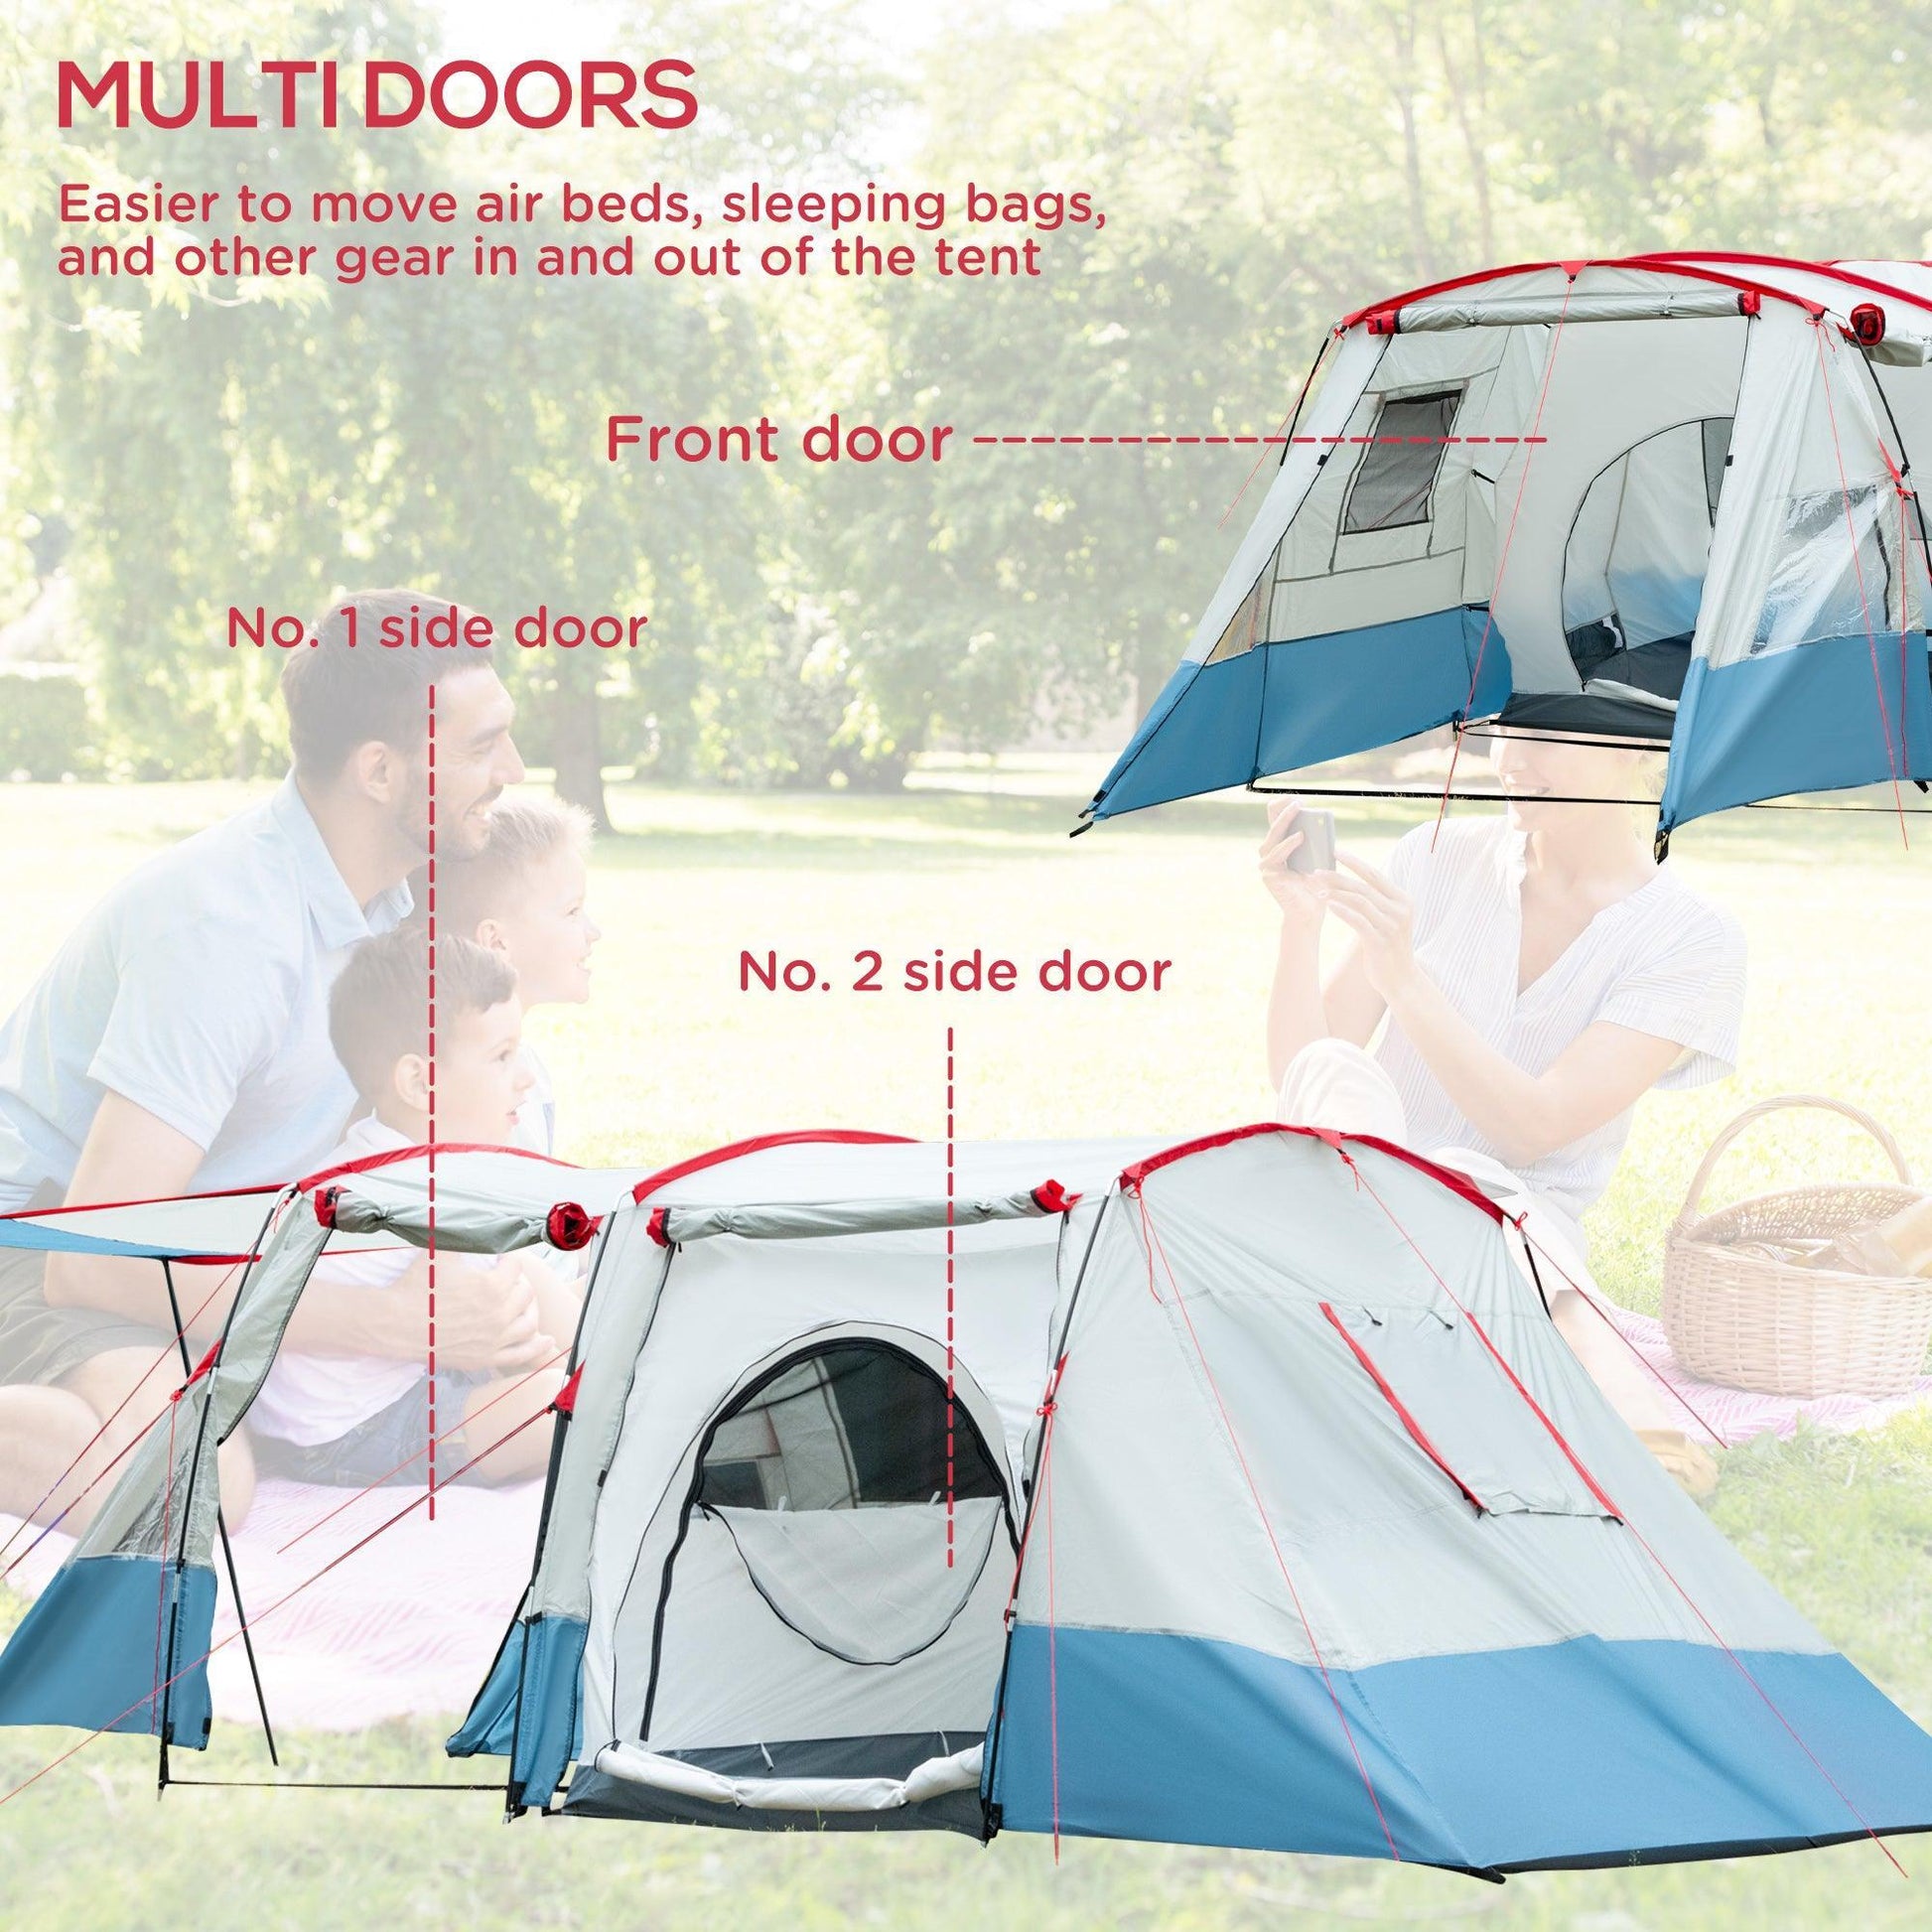 Outsunny 6-8 Person Tunnel Tent - Spacious and Portable - ALL4U RETAILER LTD